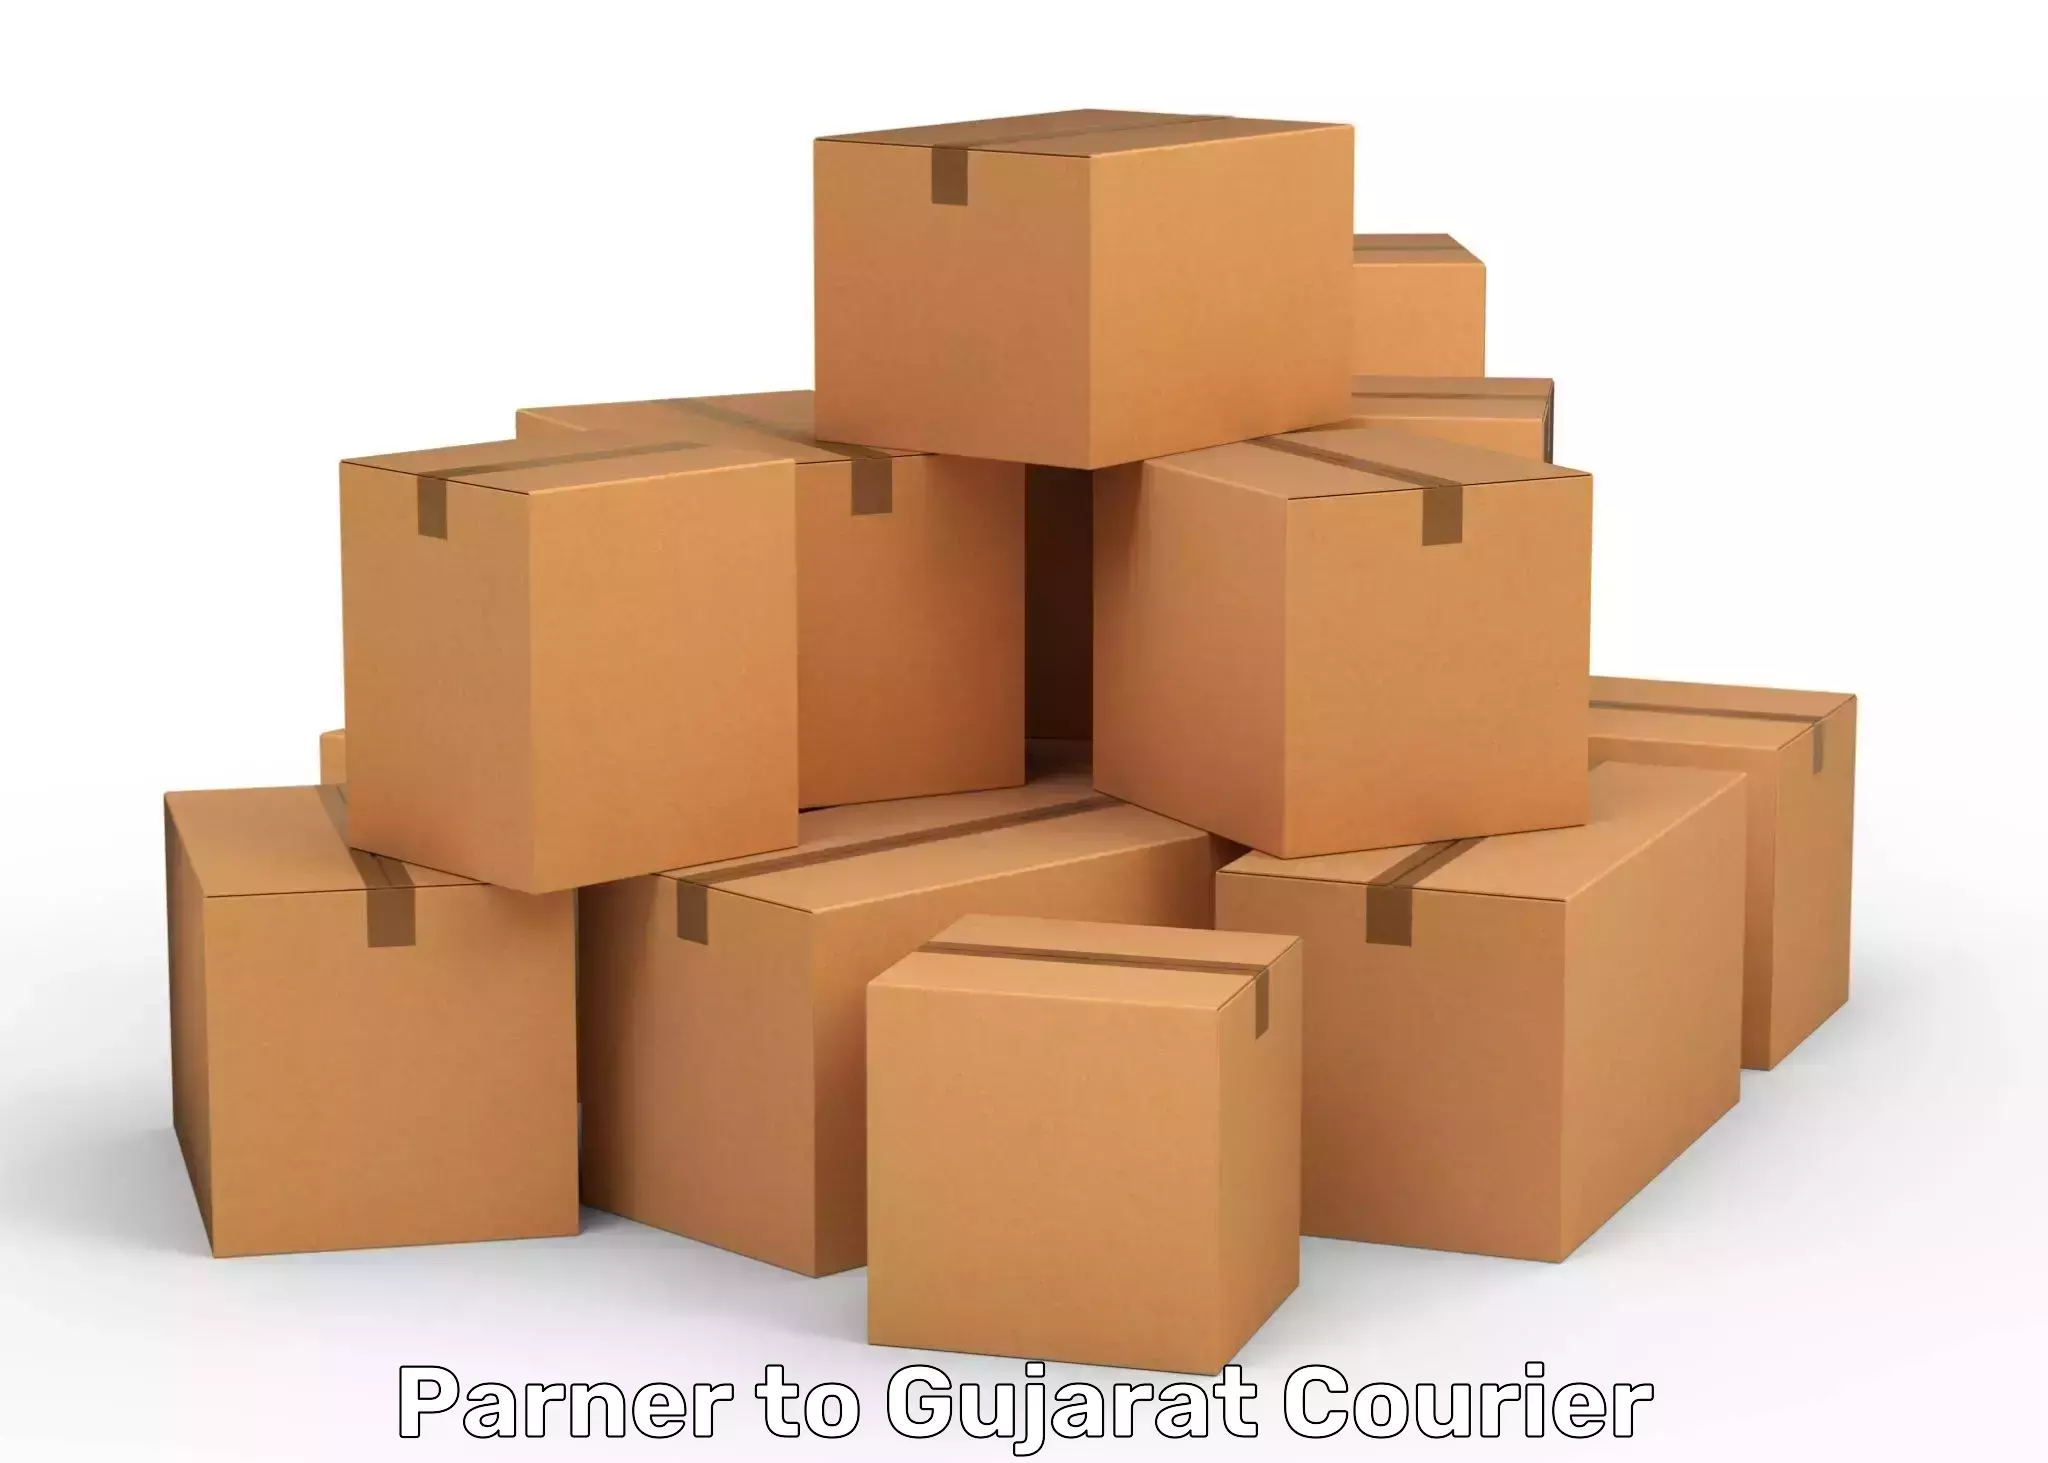 Customized shipping options Parner to Patdi